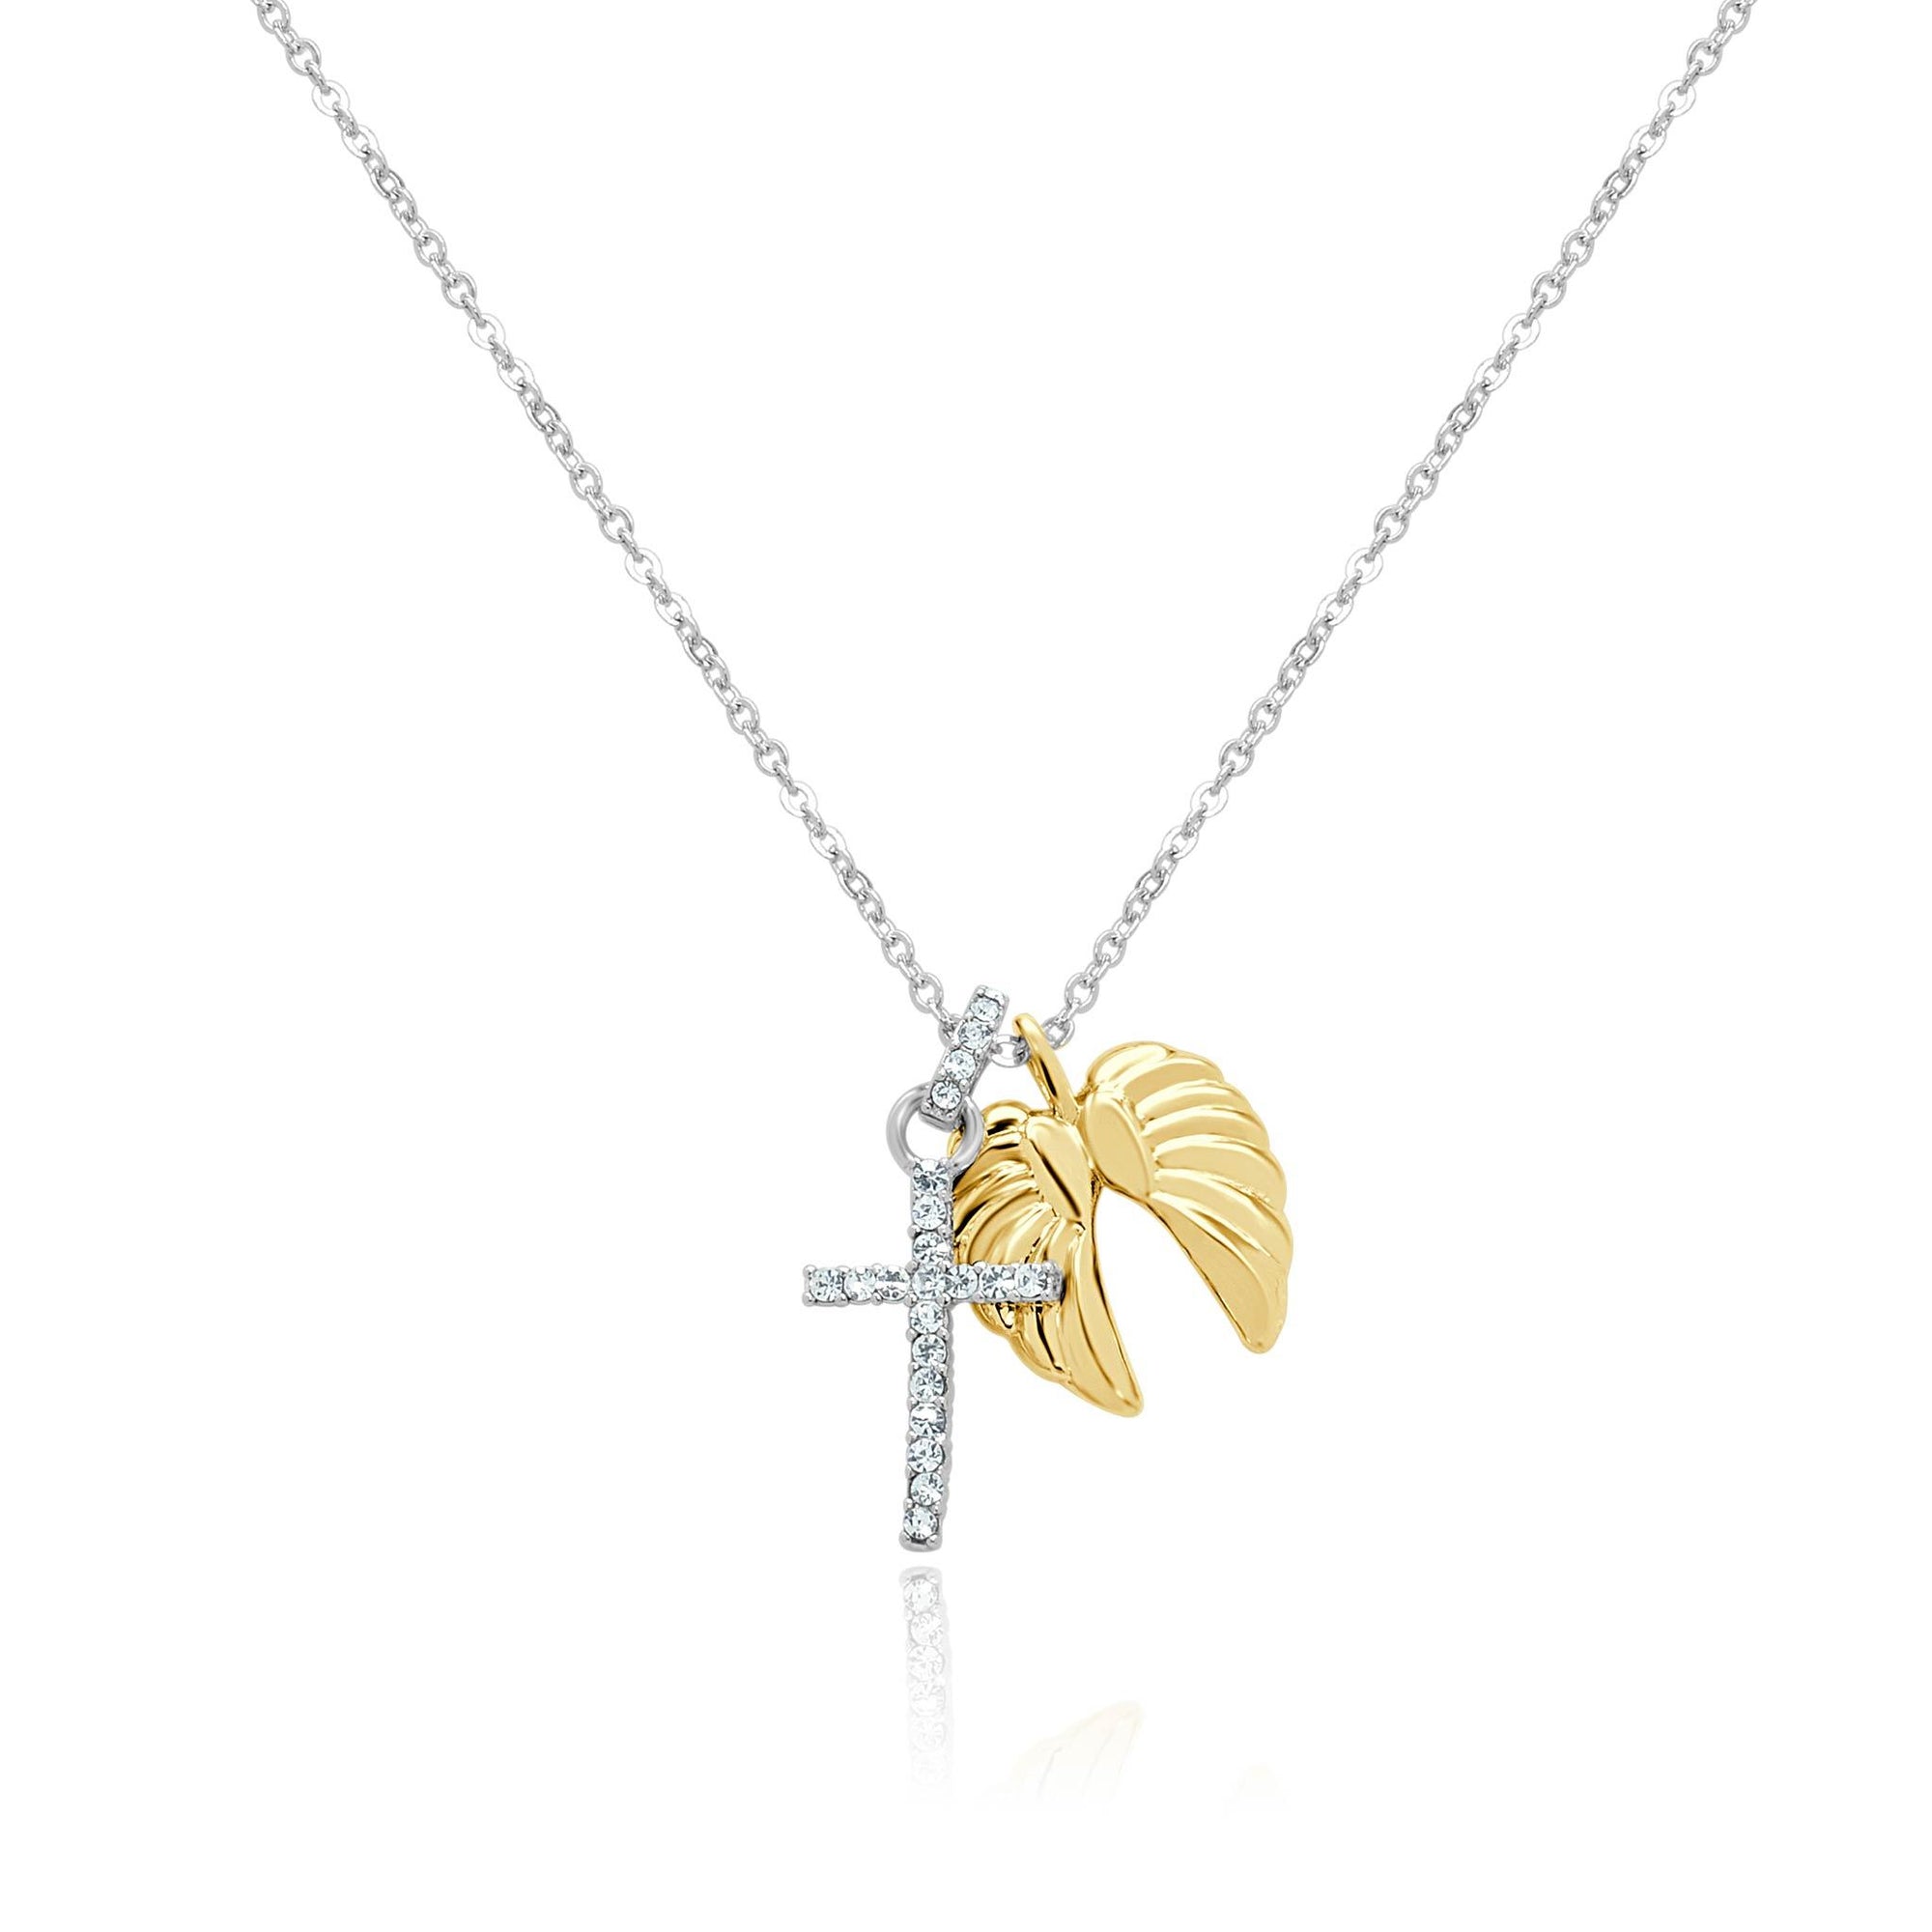 Faith and wings charm necklace-DEMI+CO Jewellery